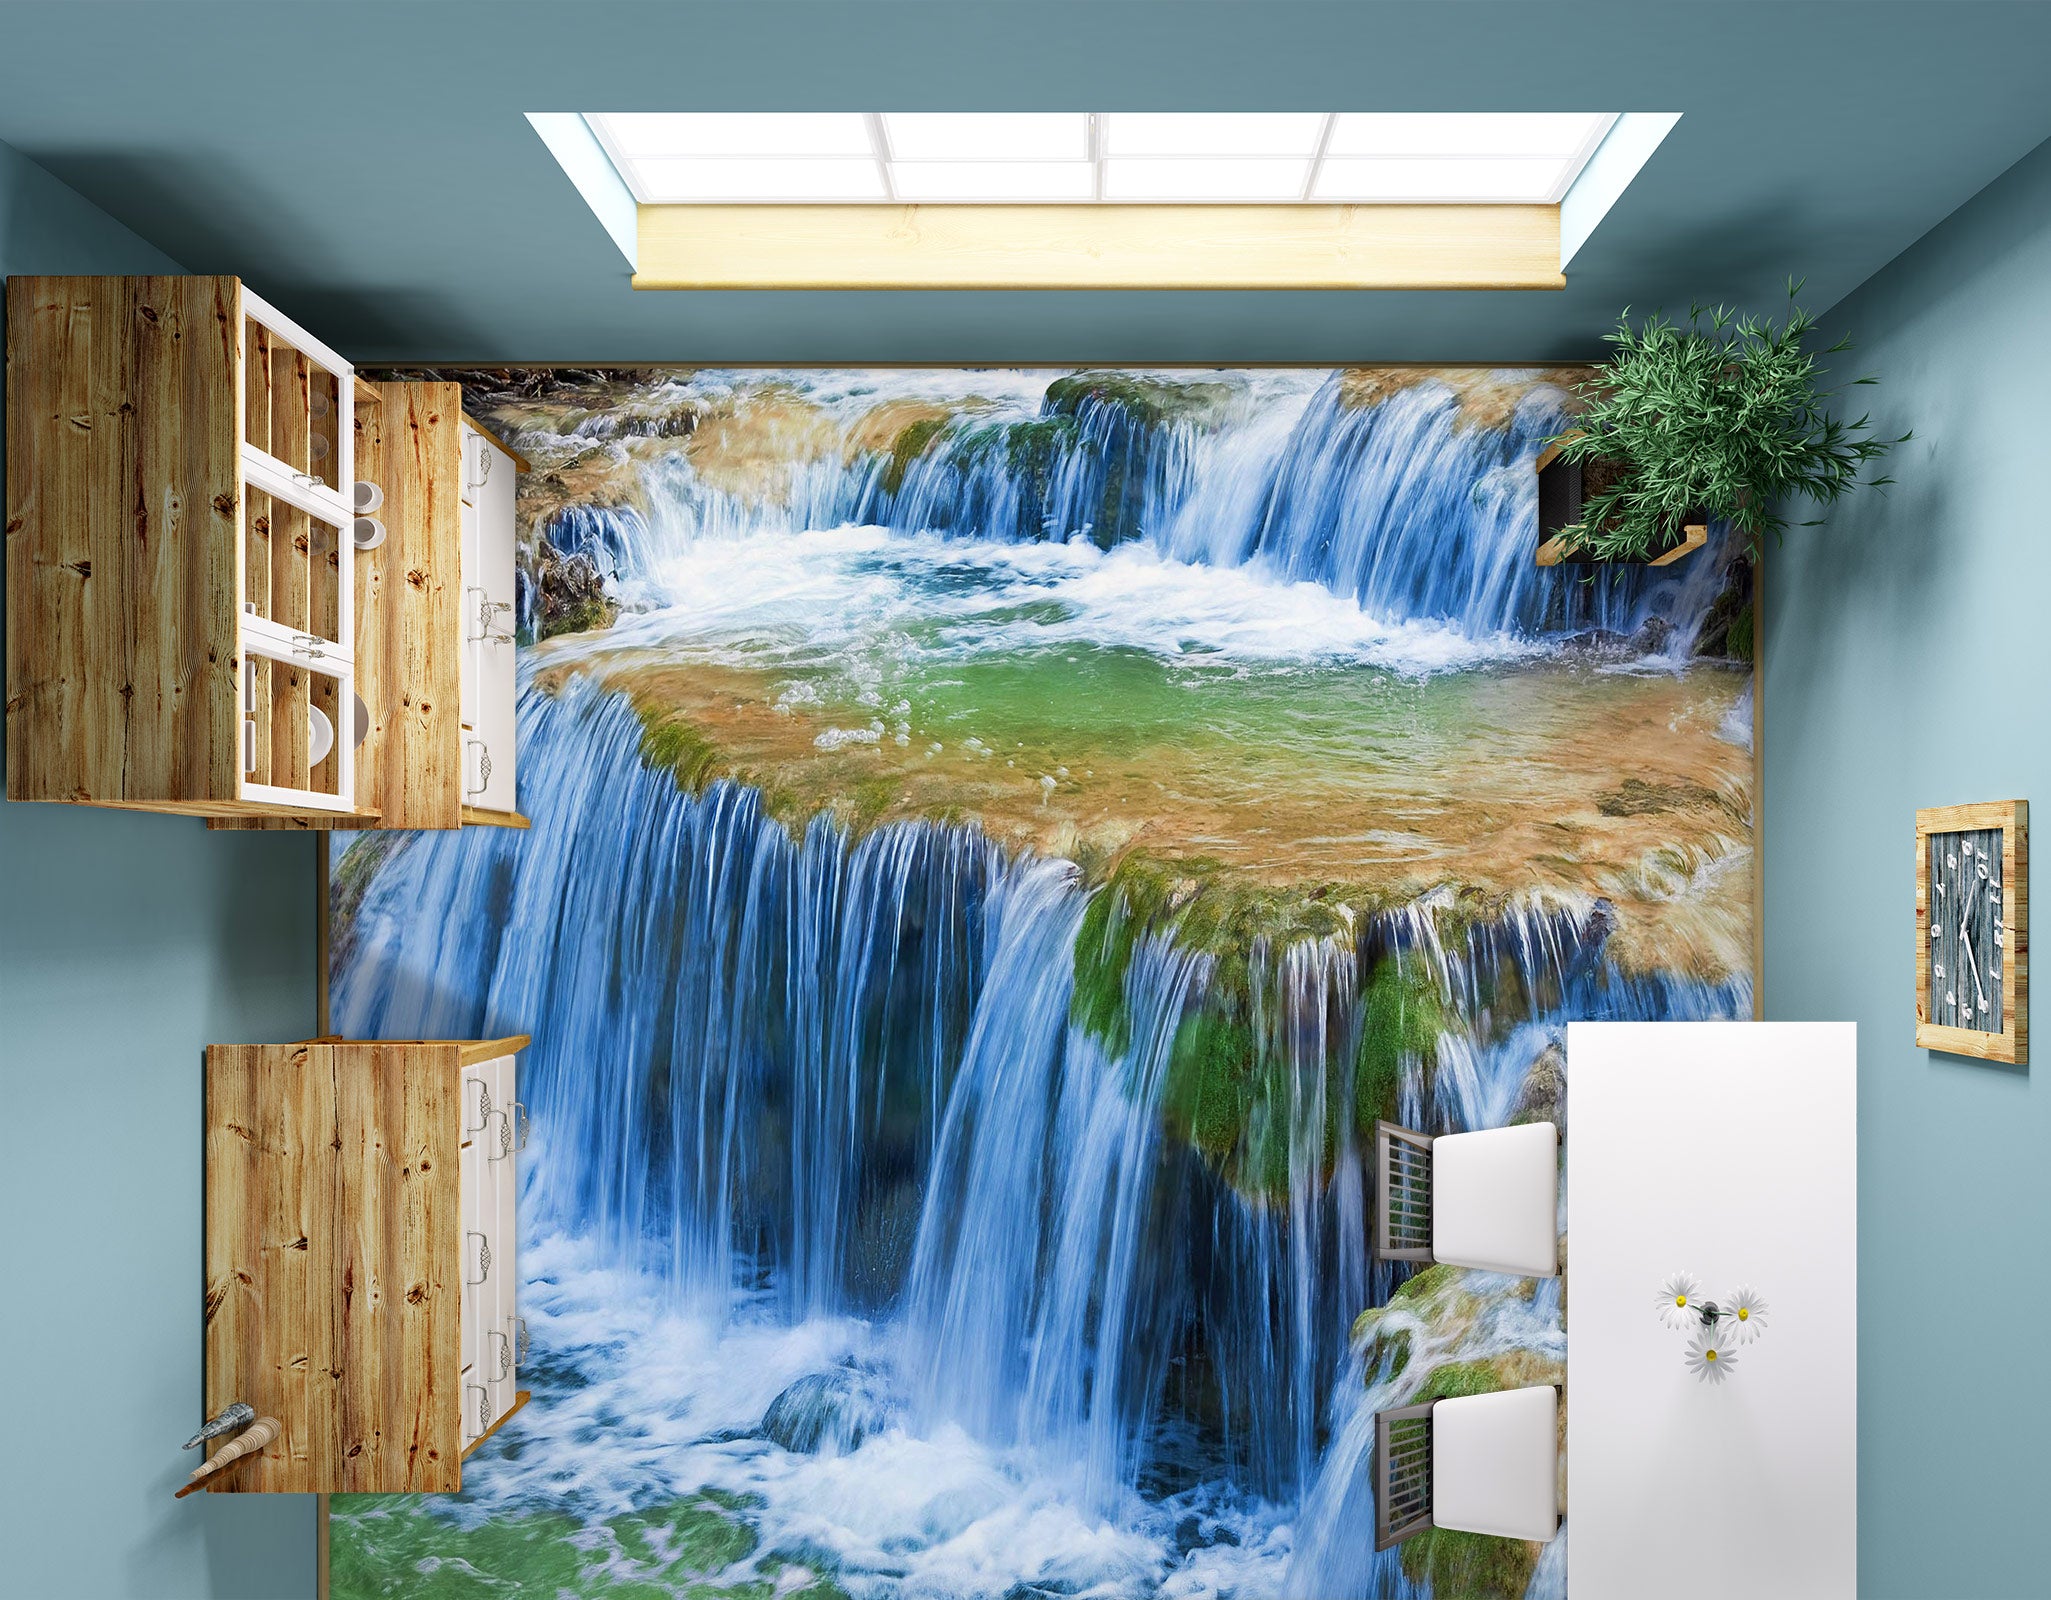 3D Small Blue Waterfall 1008 Floor Mural  Wallpaper Murals Self-Adhesive Removable Print Epoxy